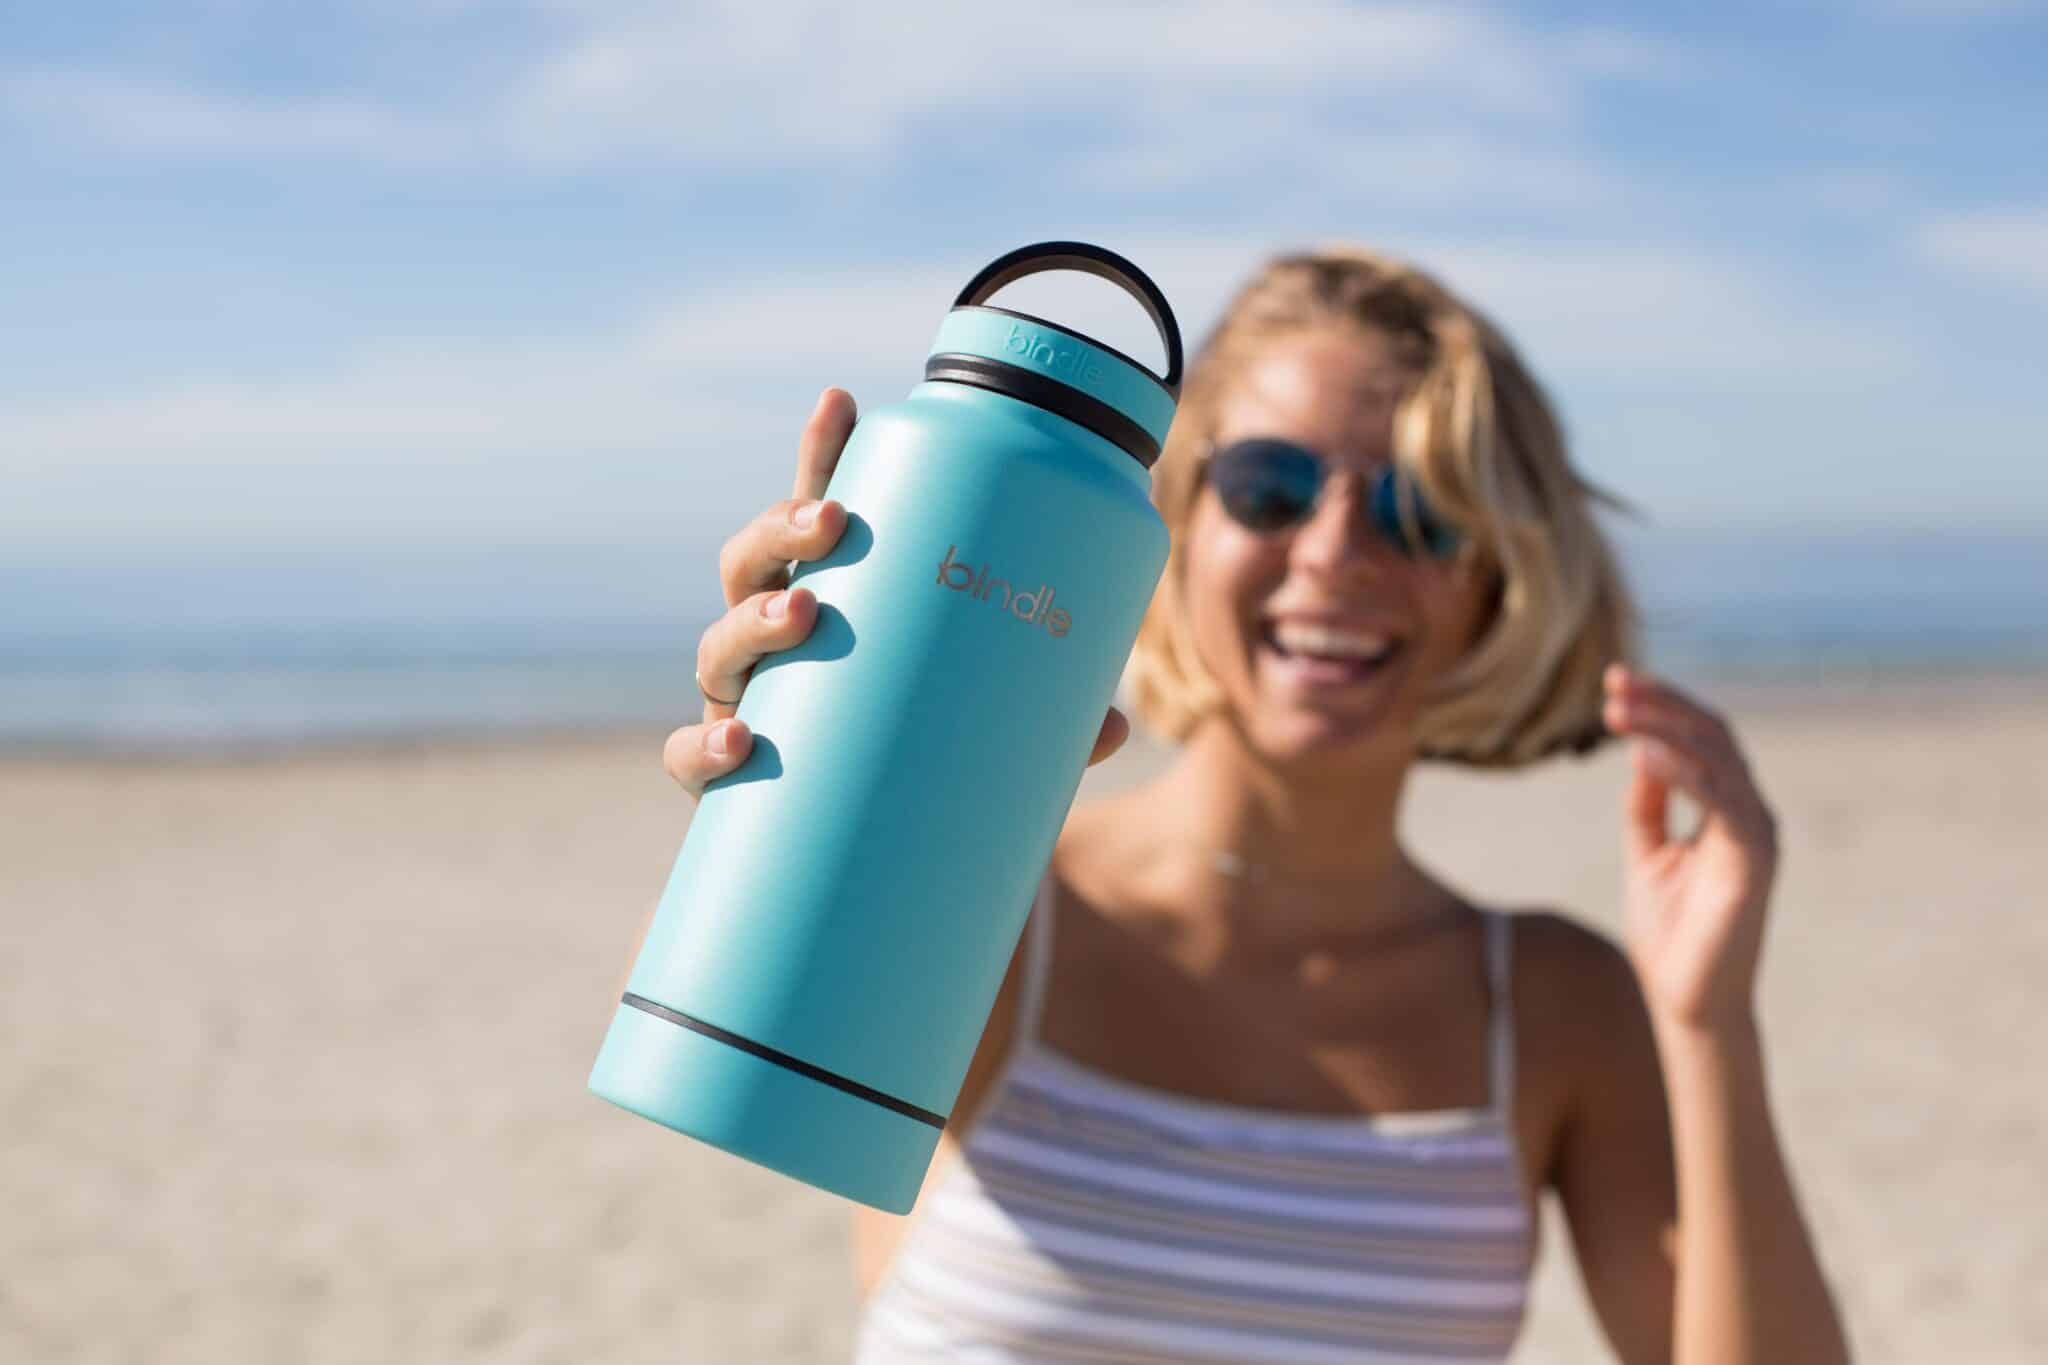 China Eco Friendly Reusable Stainless Steel Sports Water Bottle